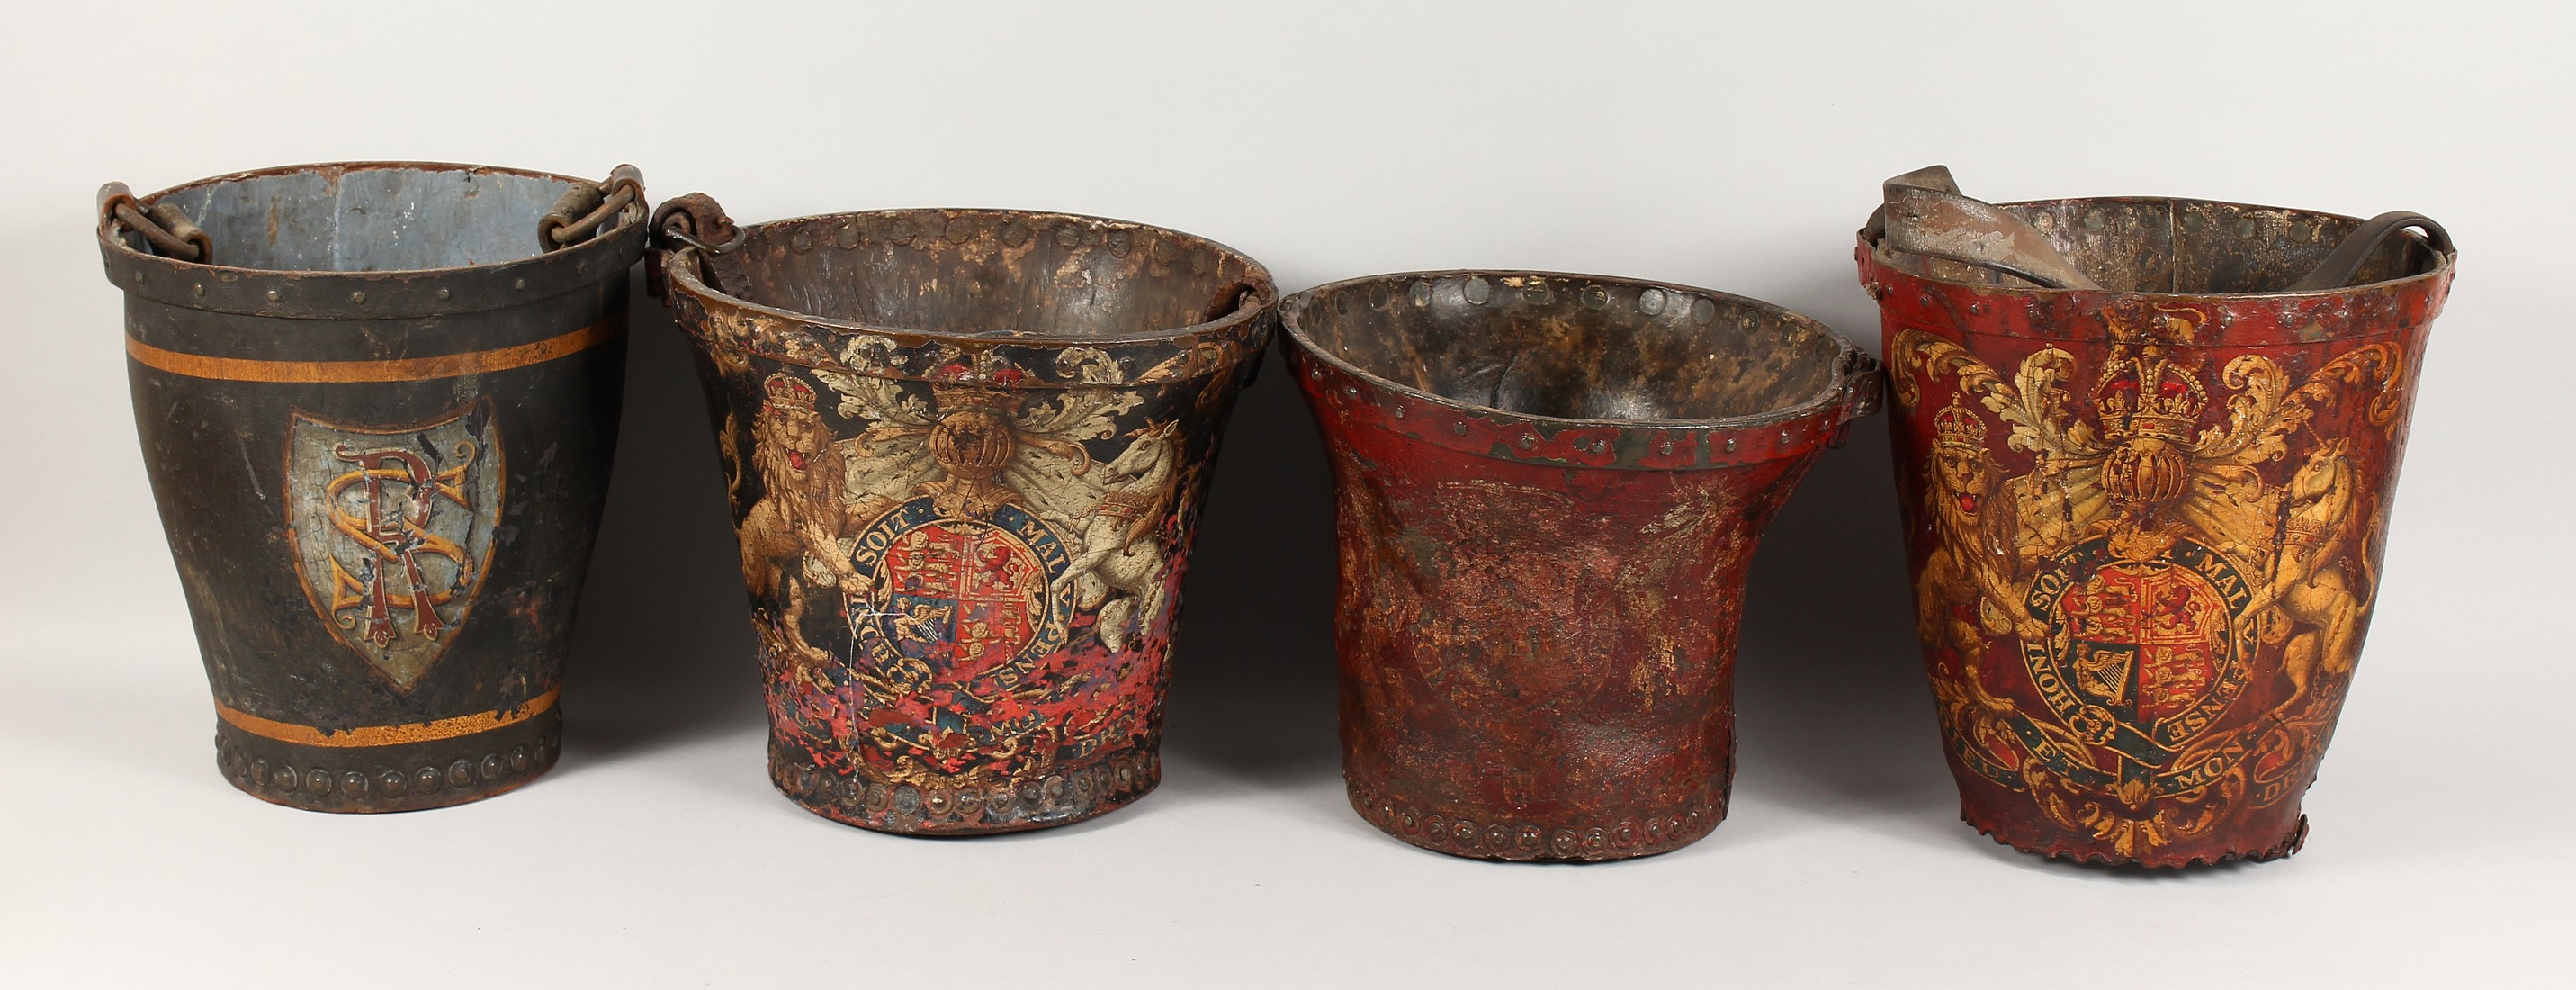 FOUR EARLY 18TH CENTURY LEATHER FIRE BUCKETS with various coat of arms.